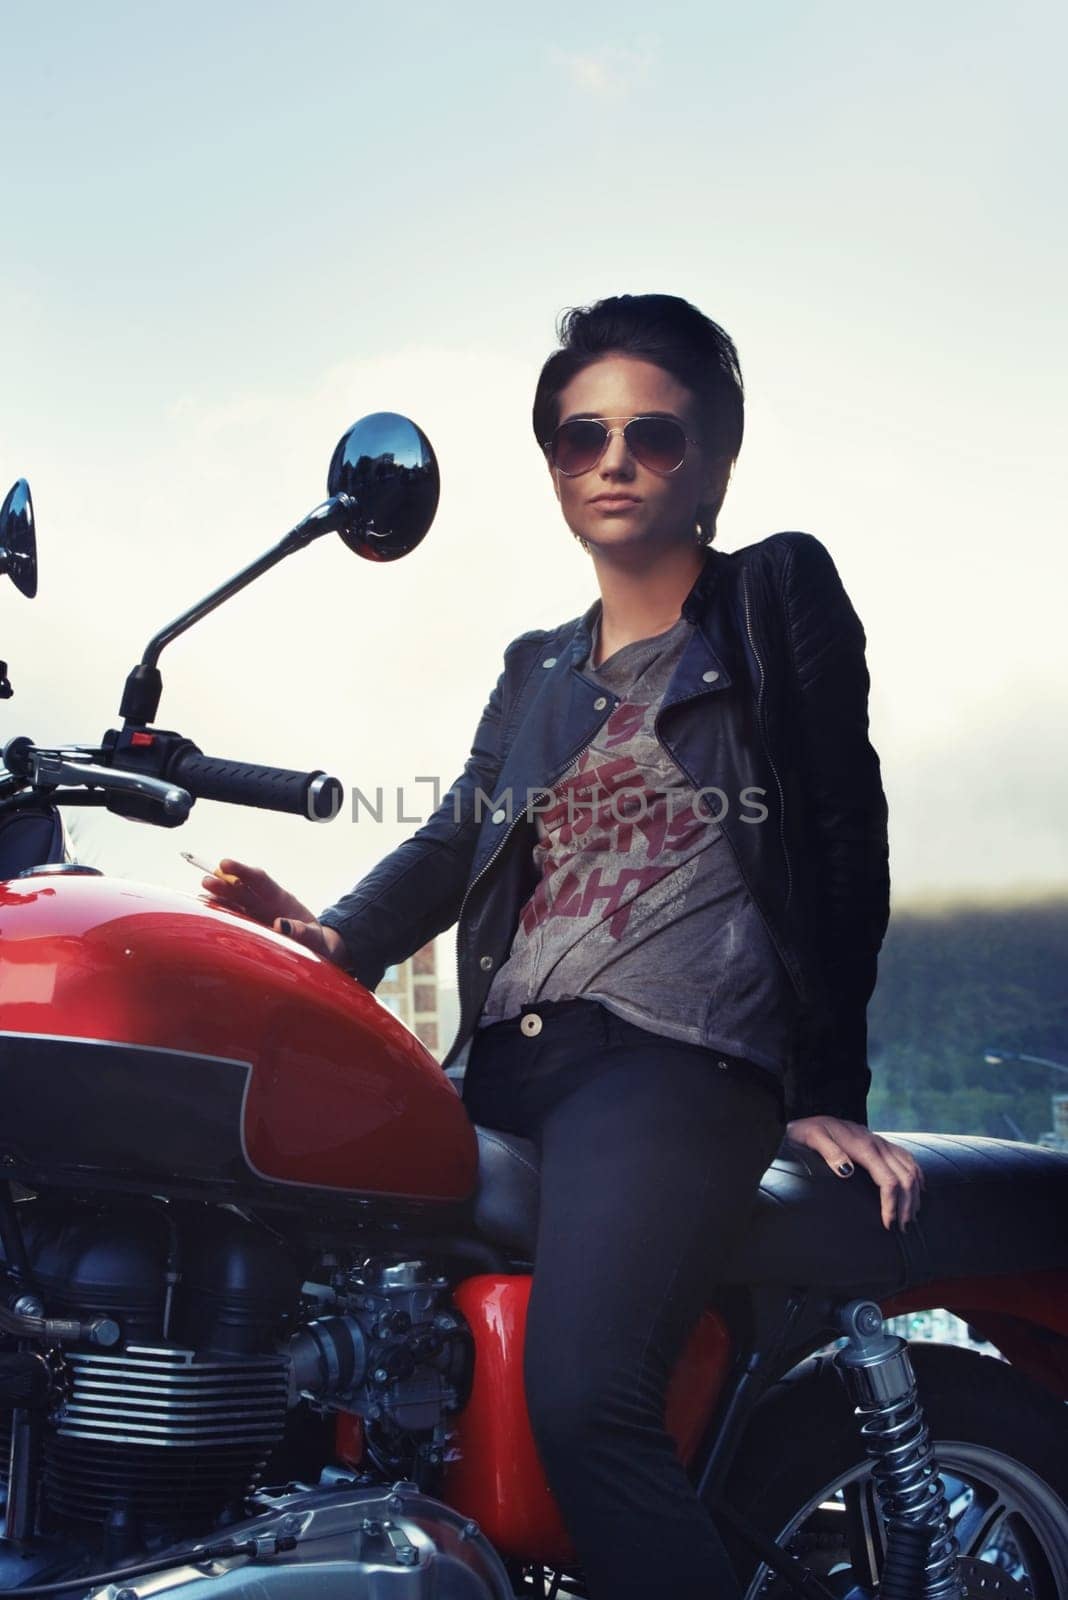 Motorcycle, leather and rebel woman in city with sunglasses for travel, transport or road trip. Fashion, evening and person with attitude on classic or vintage bike for transportation or journey.